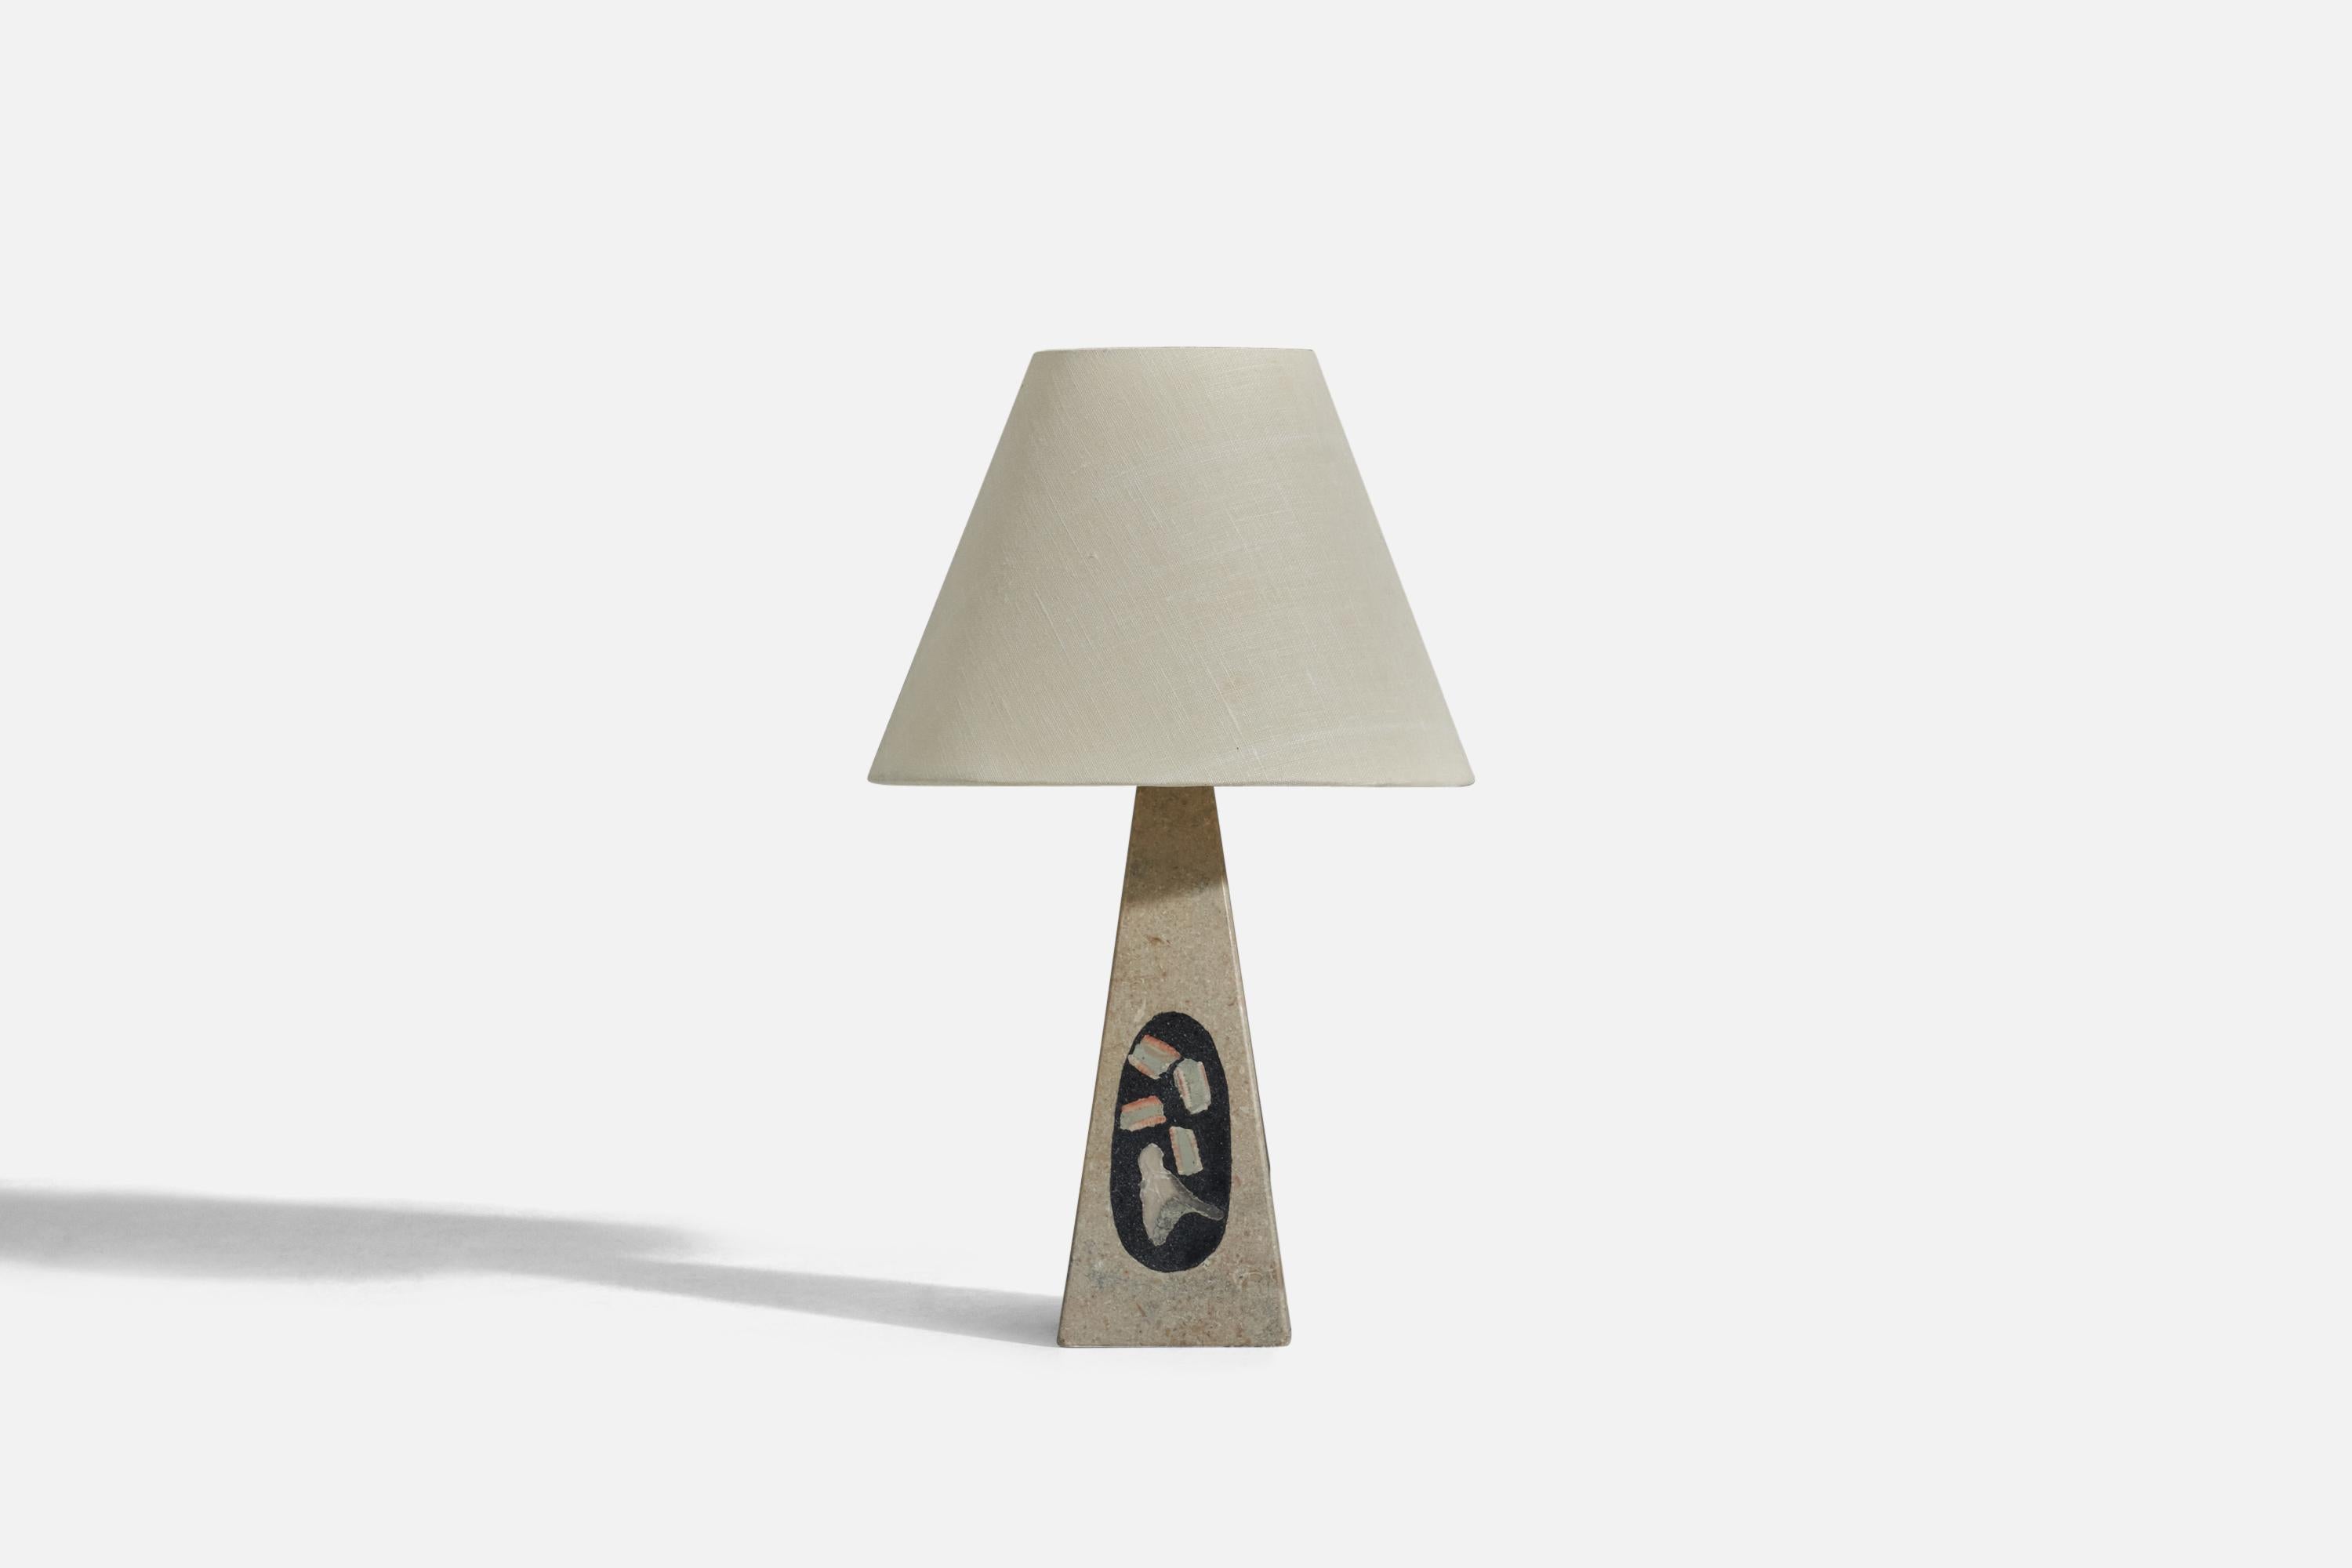 A stone table lamp designed and produced in Sweden, 1970s. 

Sold without Lampshade
Dimensions of Lamp (inches) : 10.12 x 3.16 x 3.16 (height x width x depth)
Dimensions of Lampshade (inches) : 4 x 8 x 6 (top diameter x bottom diameter x